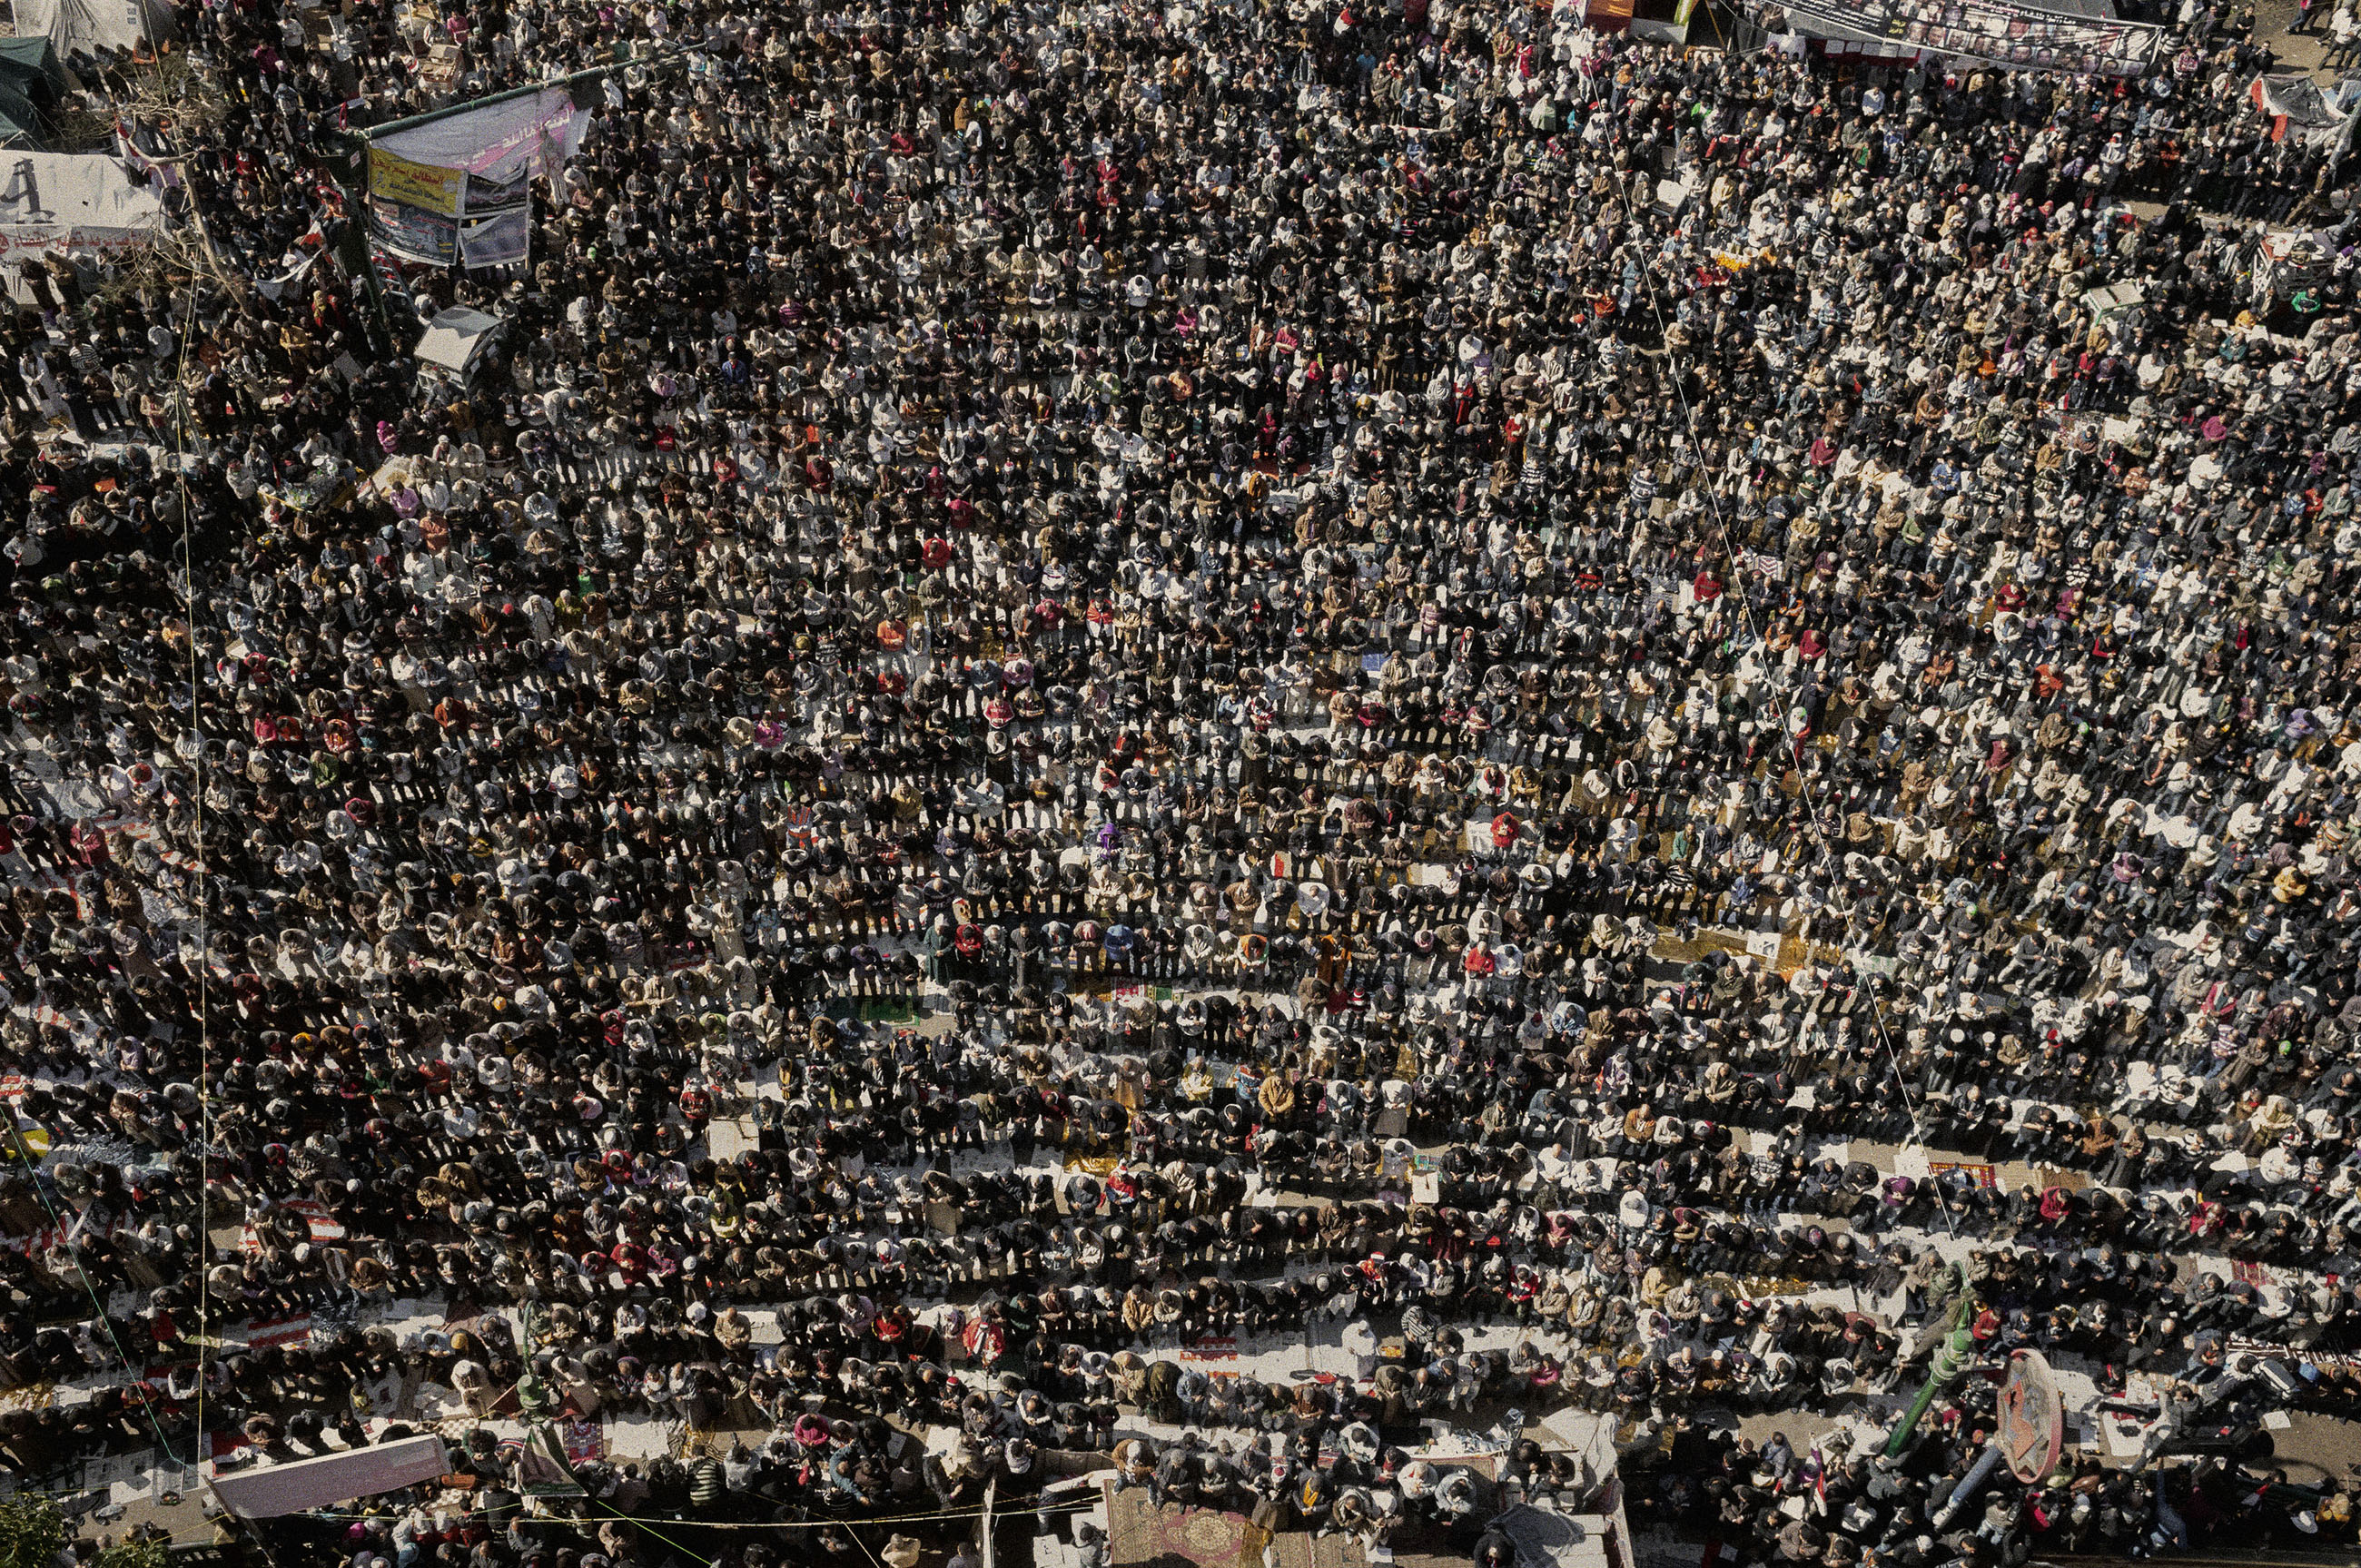 Mass outdoor prayer during
                              the first anniversary of the
                              Revolution in Tahrir Square, Cairo, Egypt, Jan. 2012.